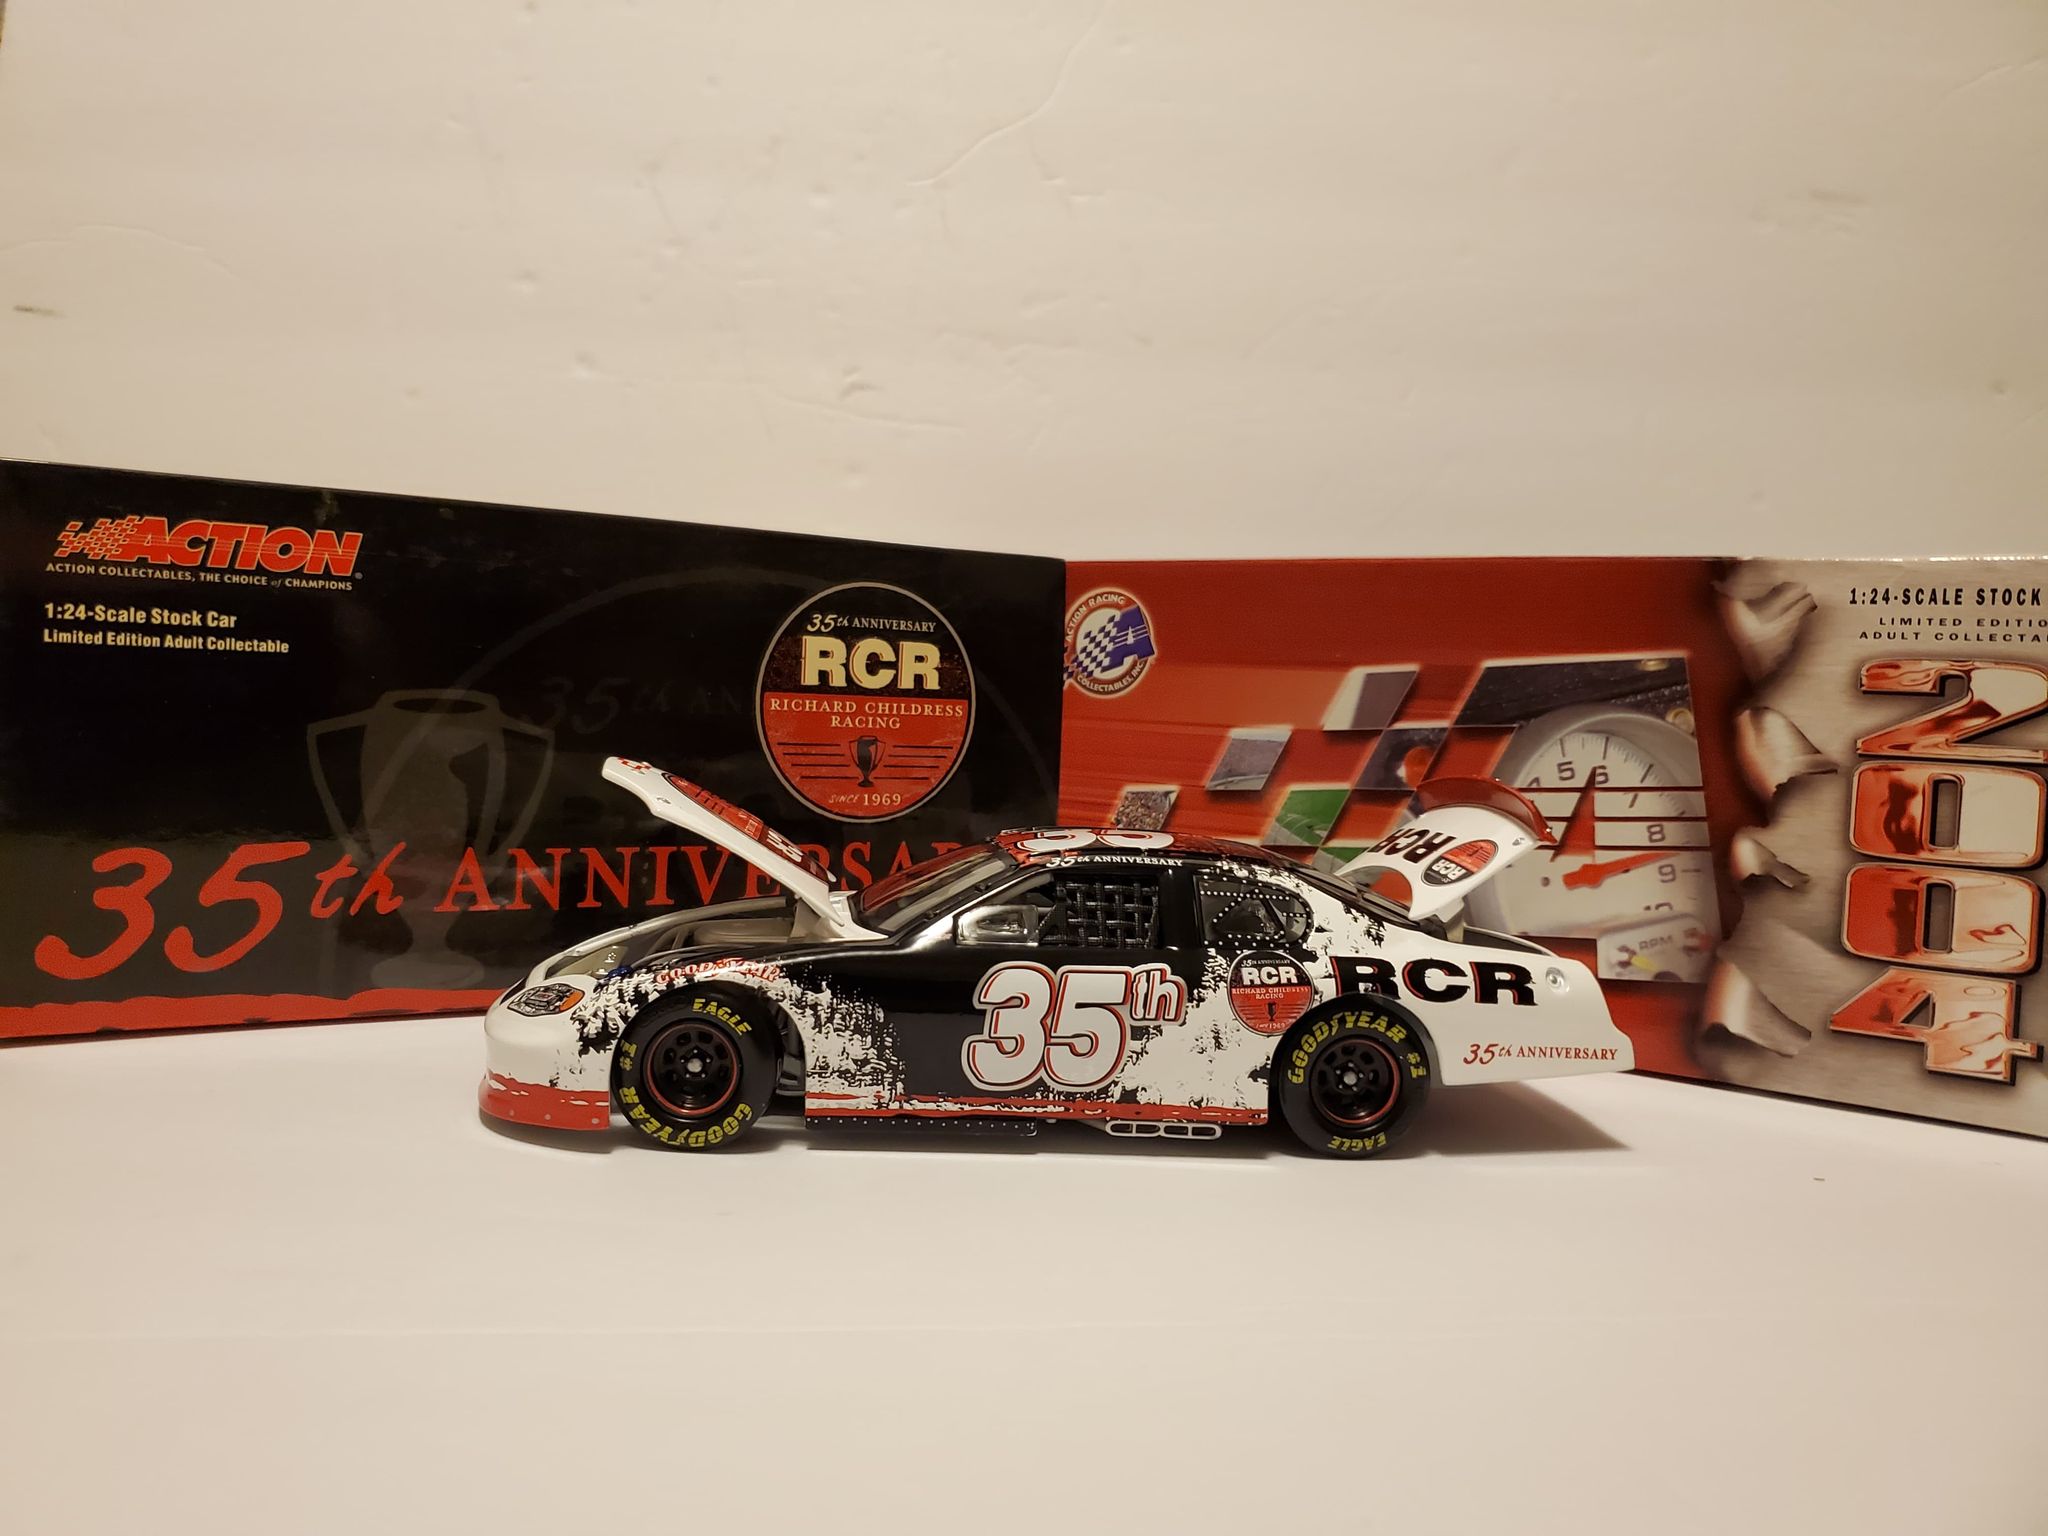 2004 Action #35 - 35TH ANNIVERSARY RCR - 1/24 Diecast - Second hand - SH002